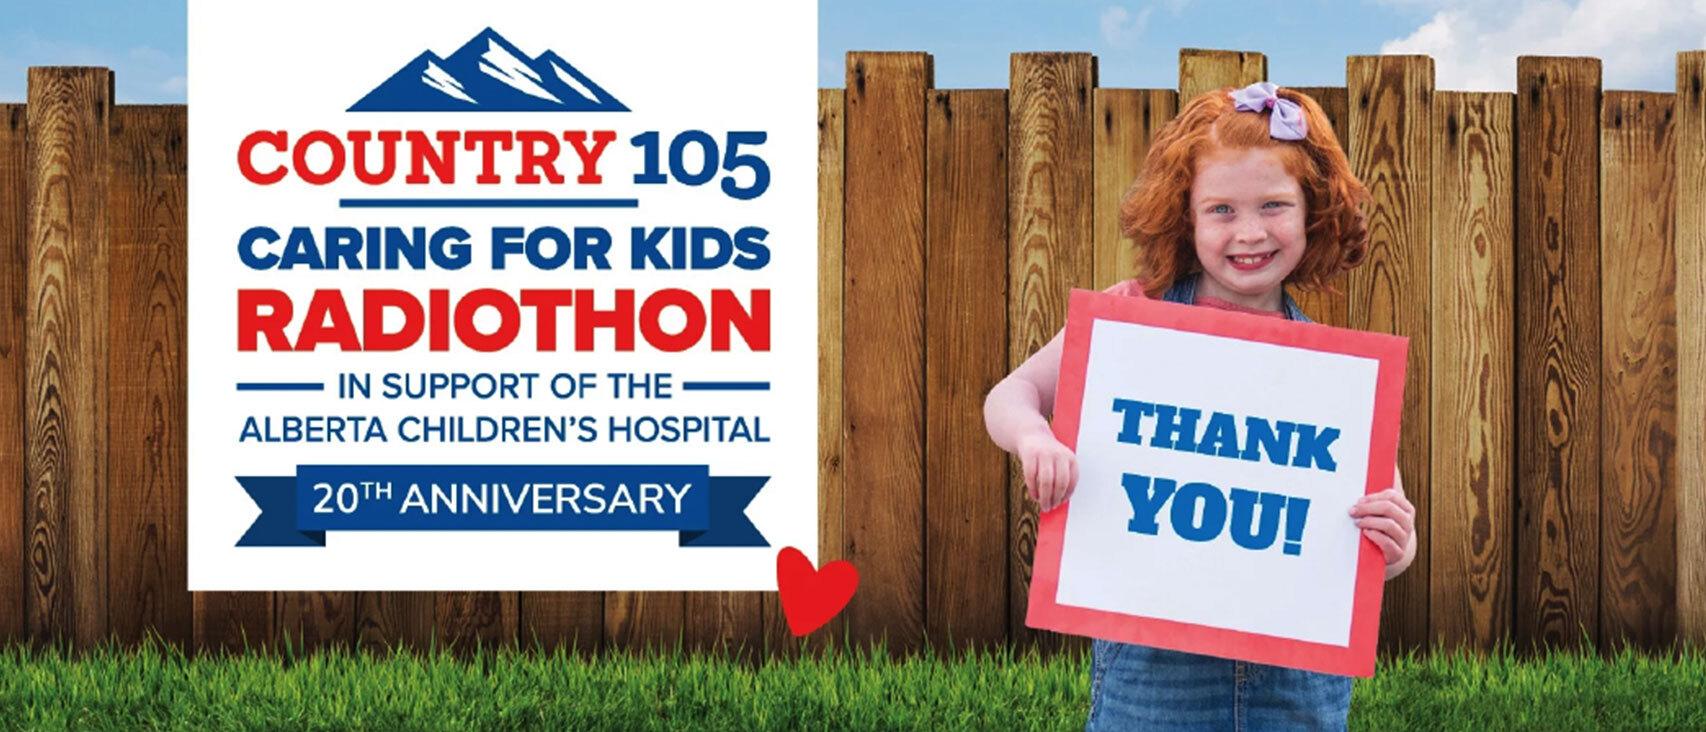 Country 105 Caring for Kids Radiothon